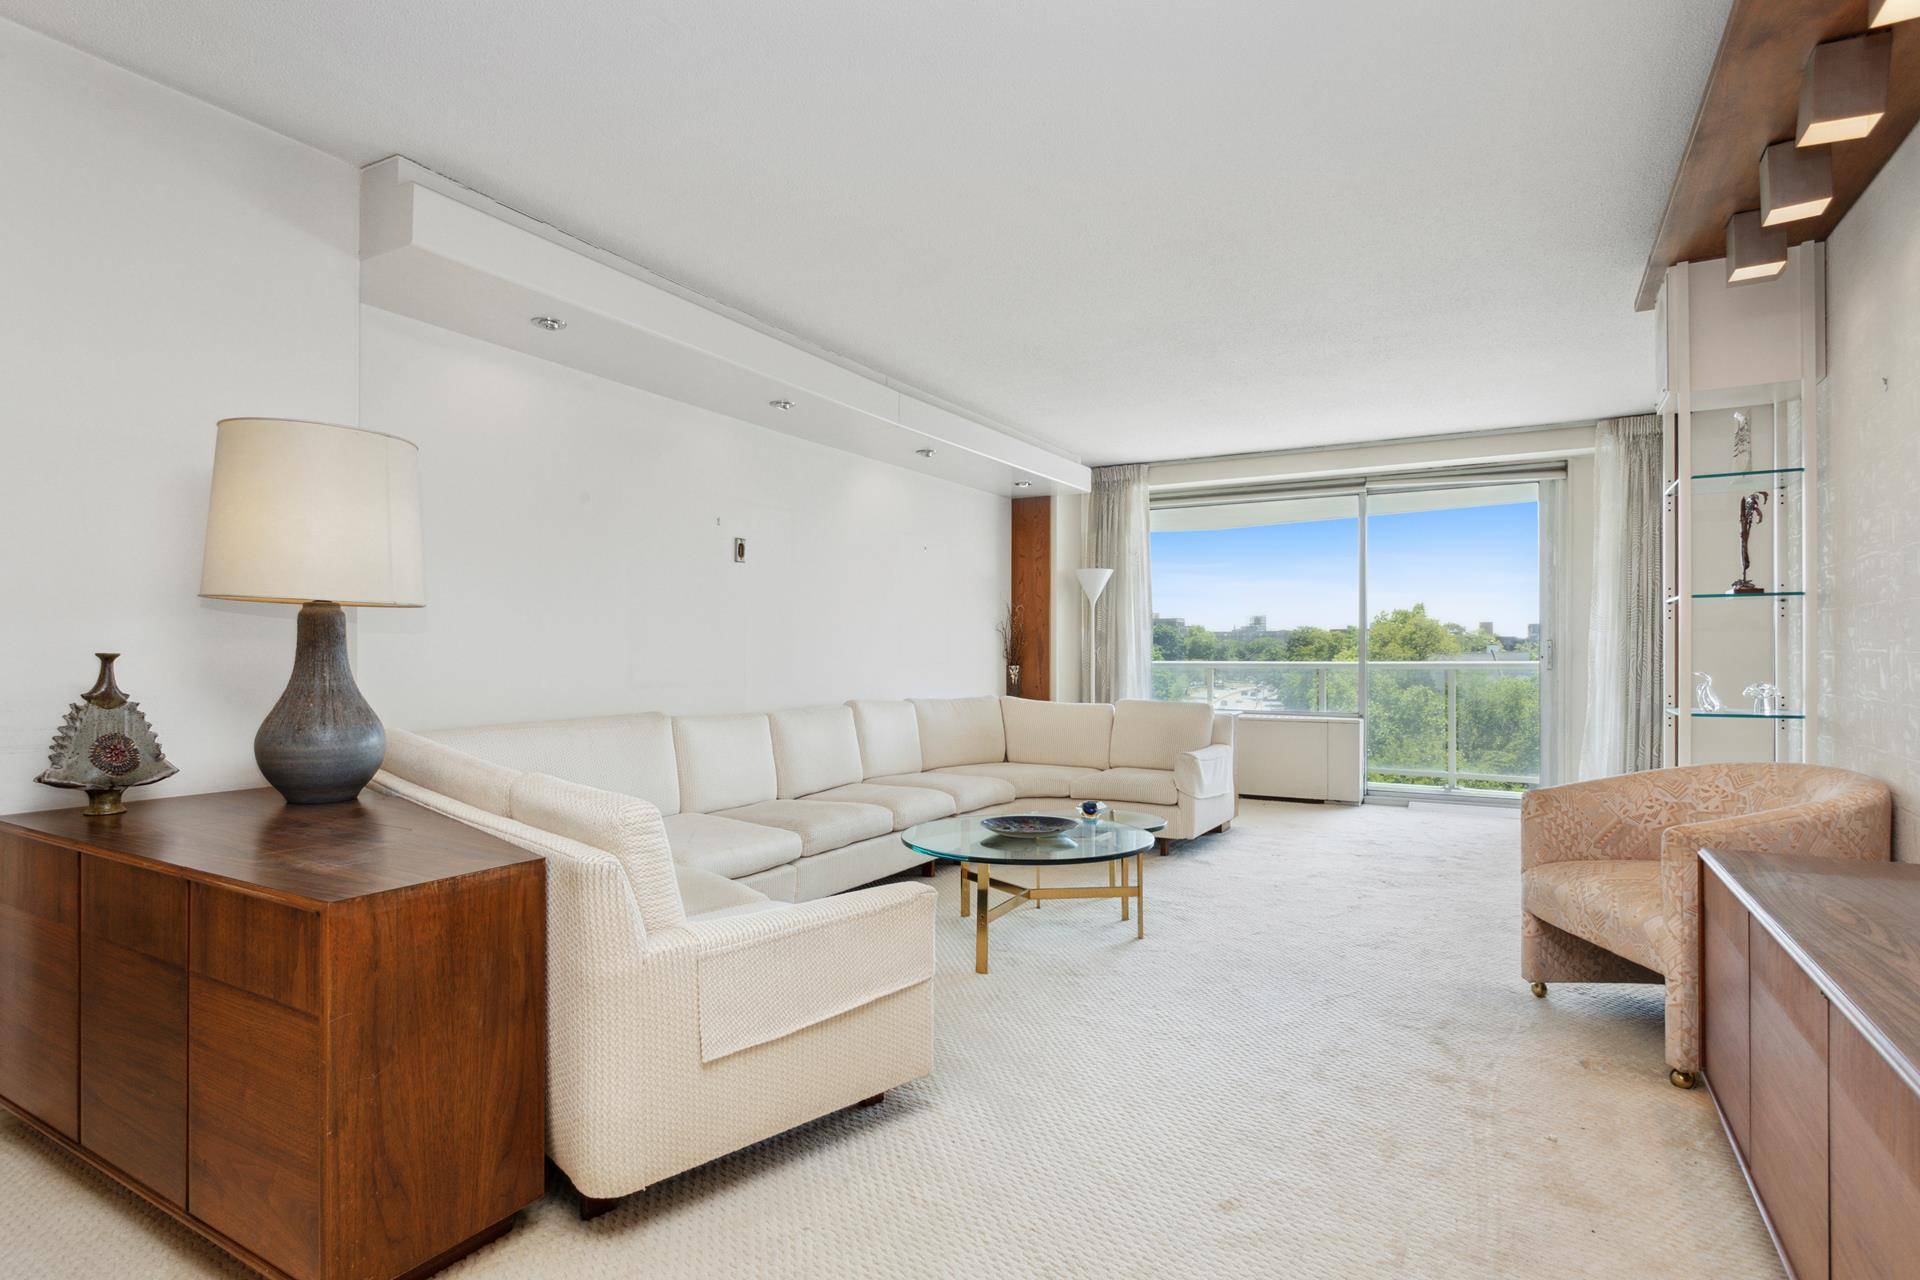 Expansive space plus sparkling sunlight creates a winning 3 bedroom and 3 renovated bath apartment in Riverdale's premiere building, The Whitehall.